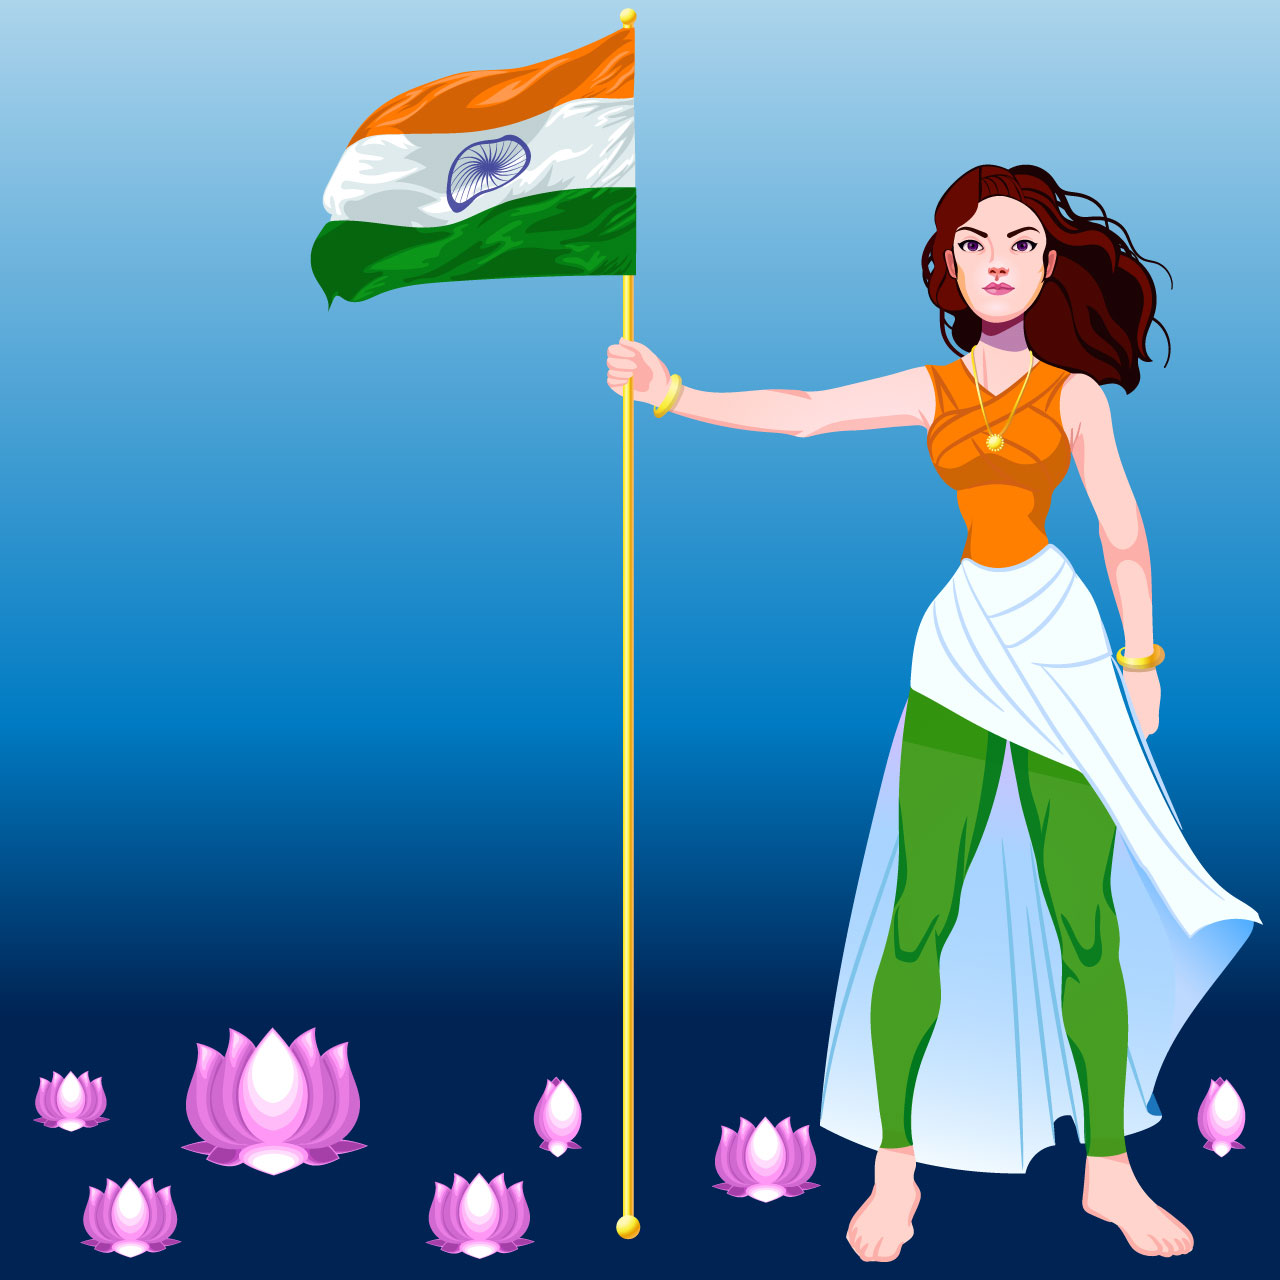 Indian flag independence day wishes with girl holding hand drawing sketch